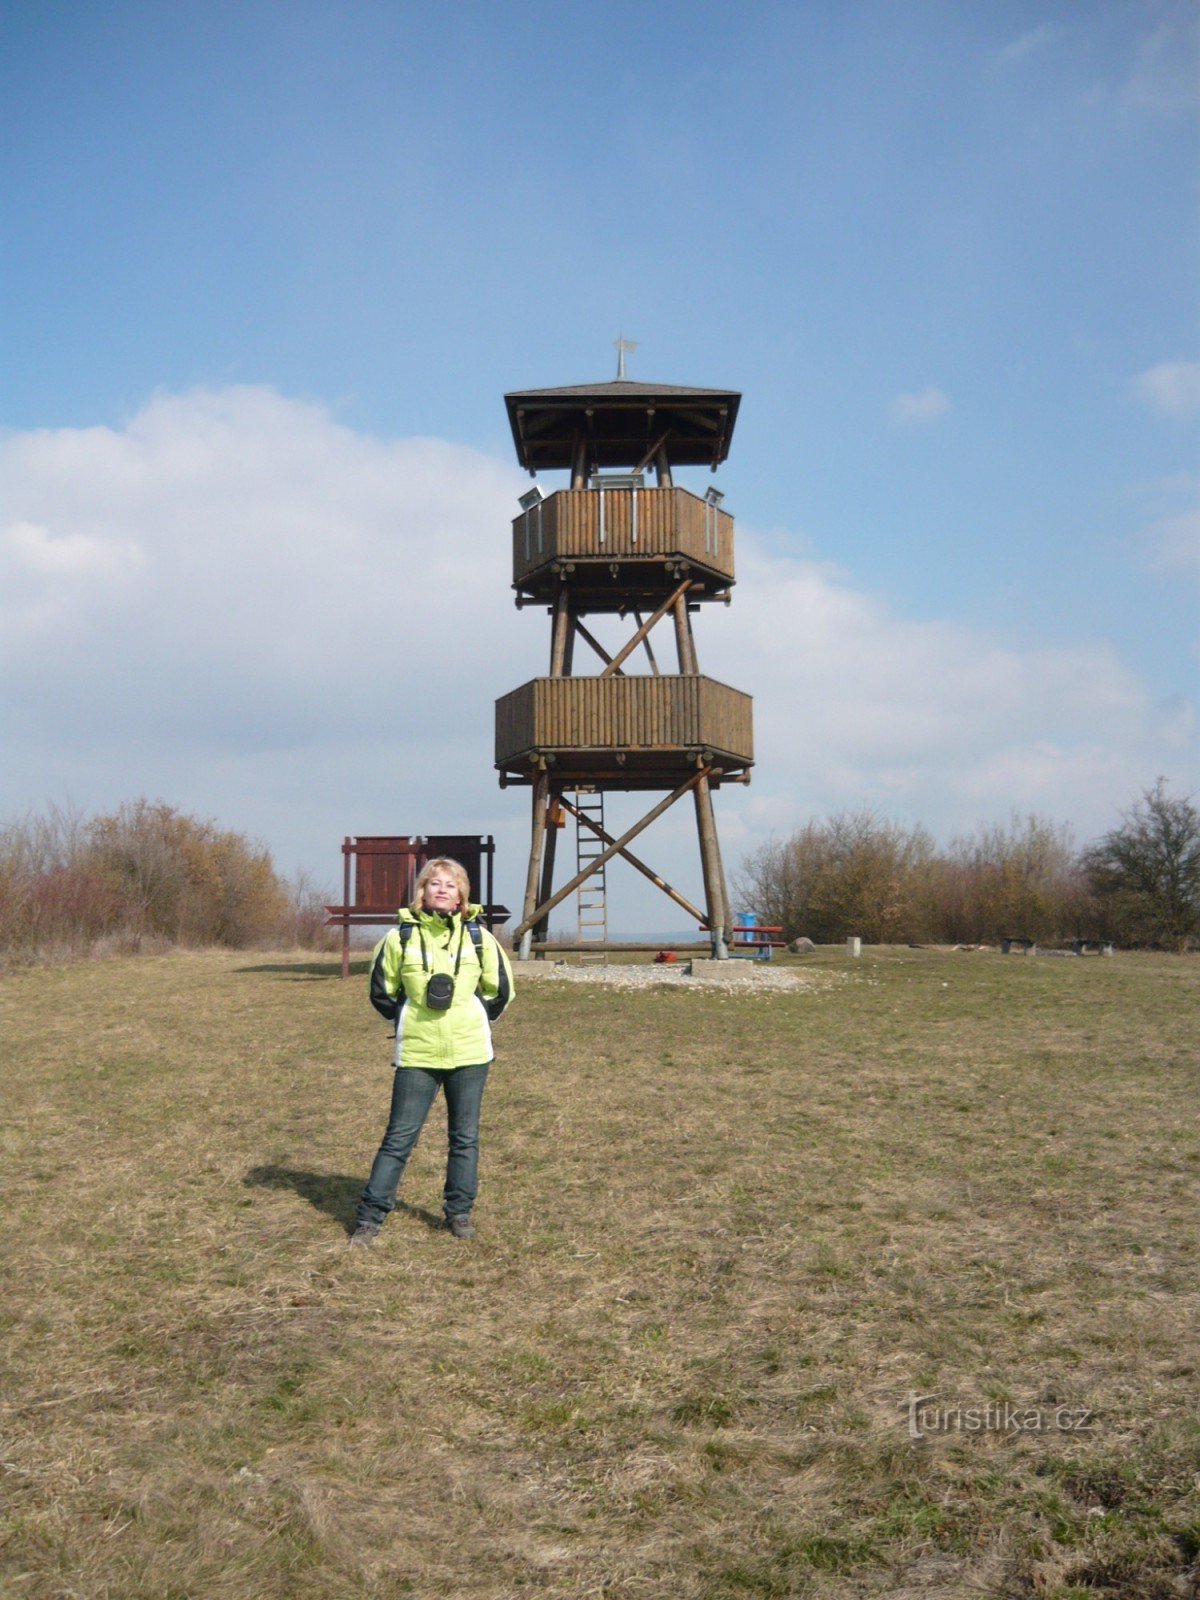 Malý Chlum lookout tower